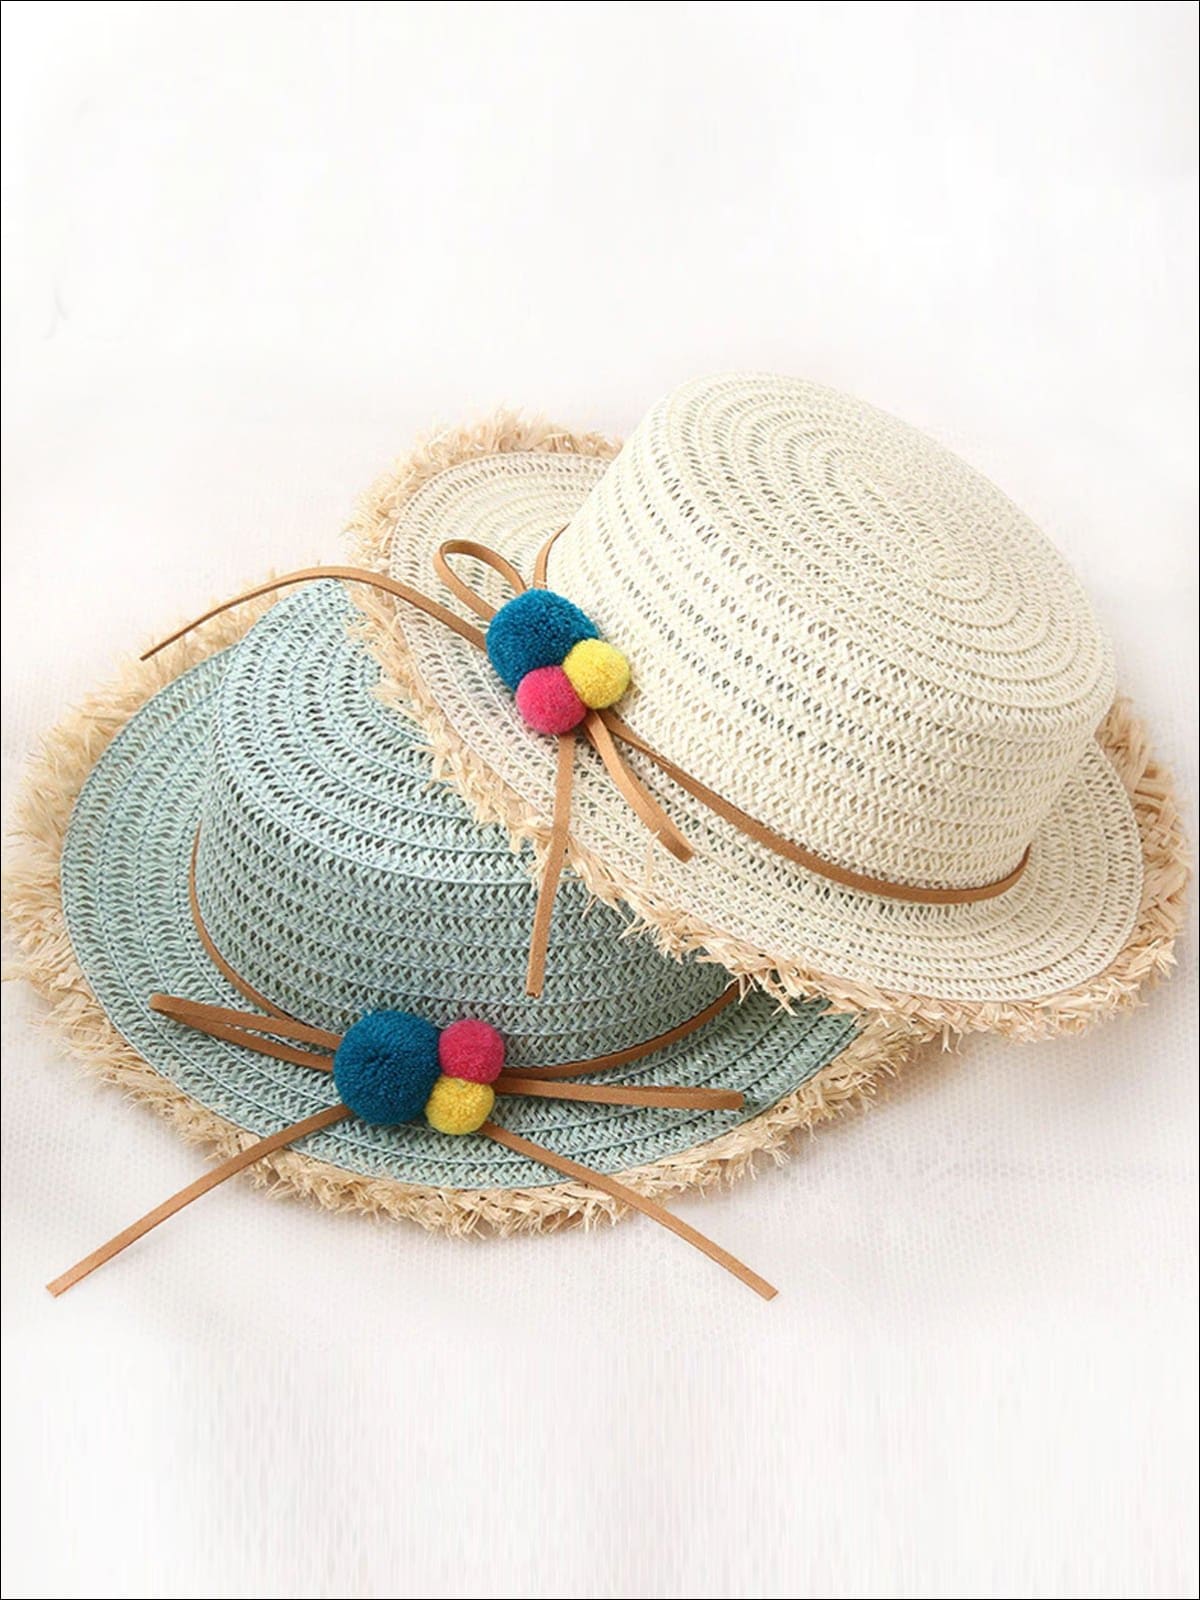 Girls Straw Hat with and Pom Poms Mia Belle Girls